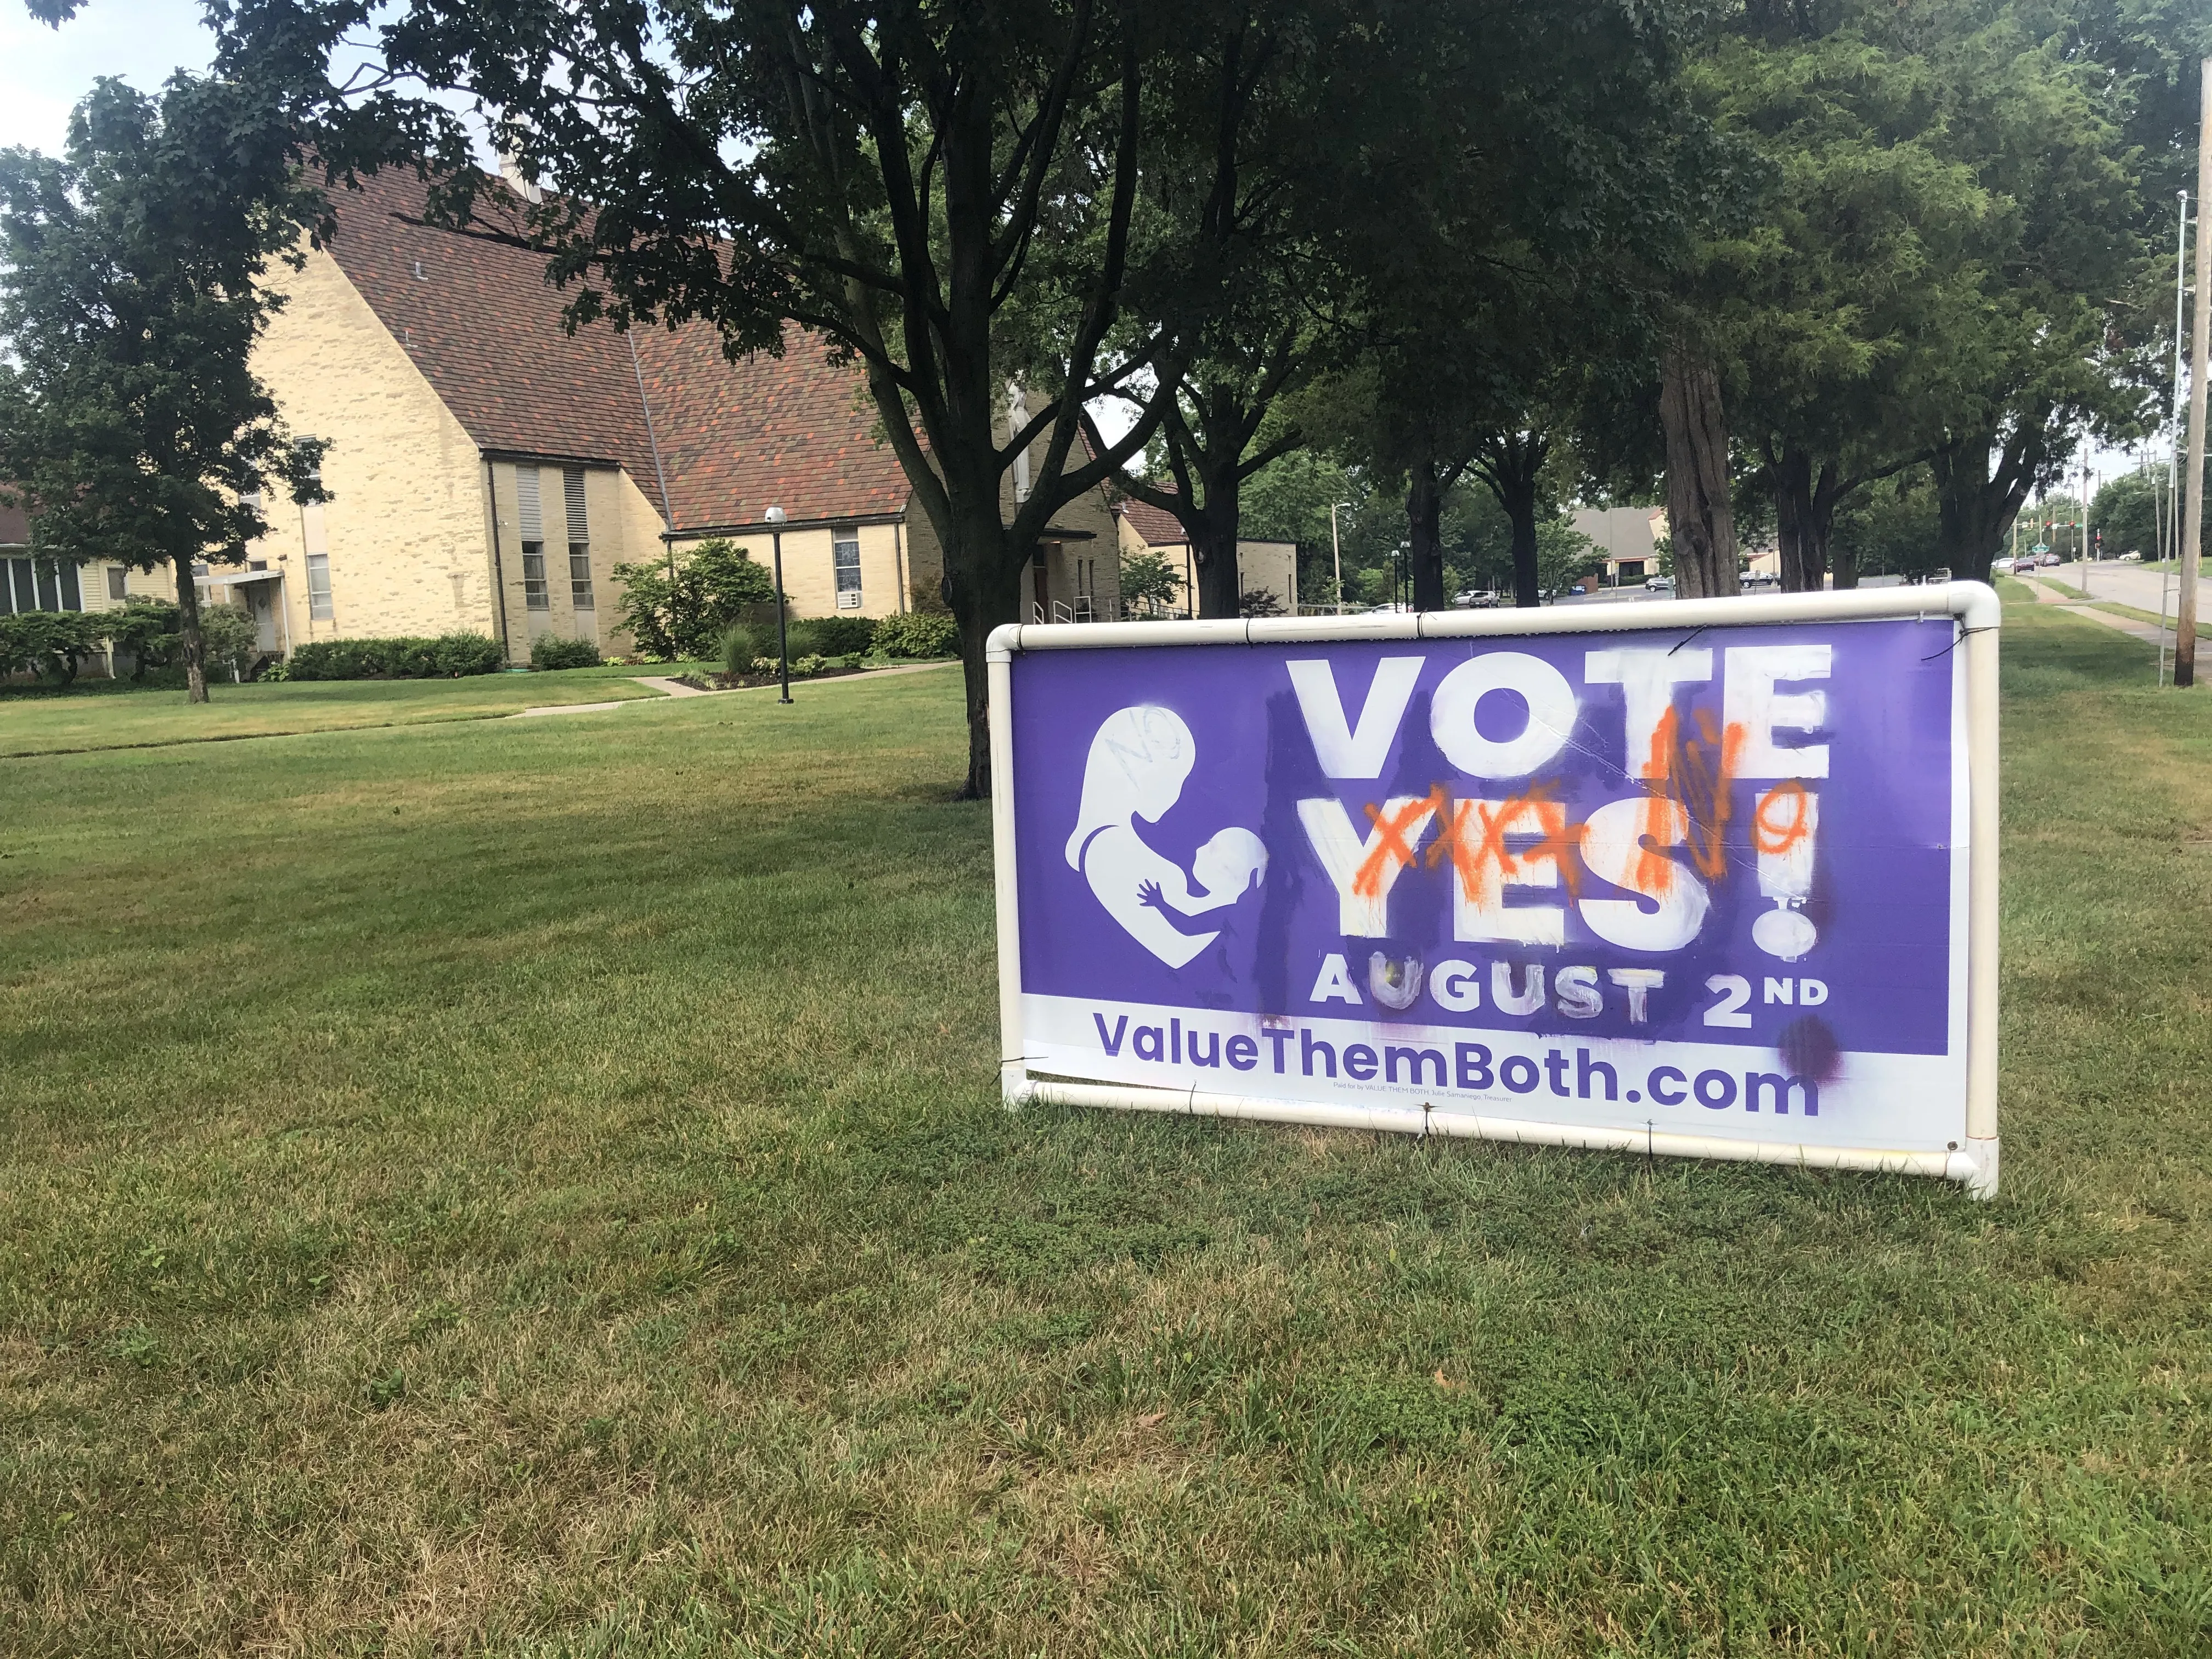 A defaced sign in favor of the Value Them Both amendment outside Most Pure Heart of Mary parish in Topeka, Kan., July 27, 2022. Carl Bunderson/CNA